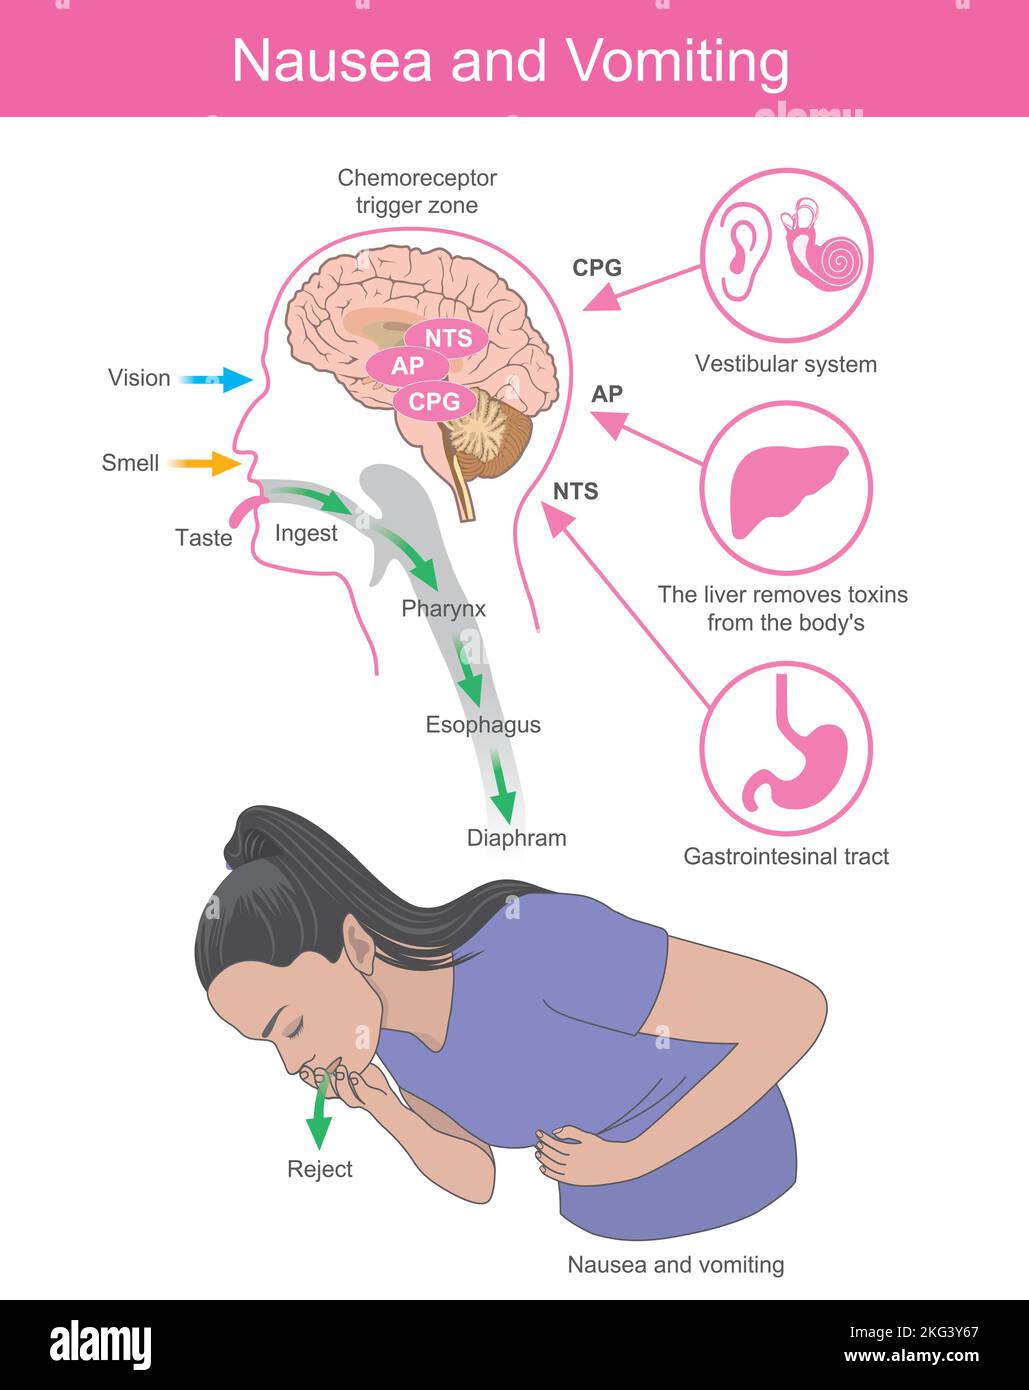 Nausea and Vomiting. A woman with symptoms the nausea and vomiting which is the effect of brain processes. Stock Vector